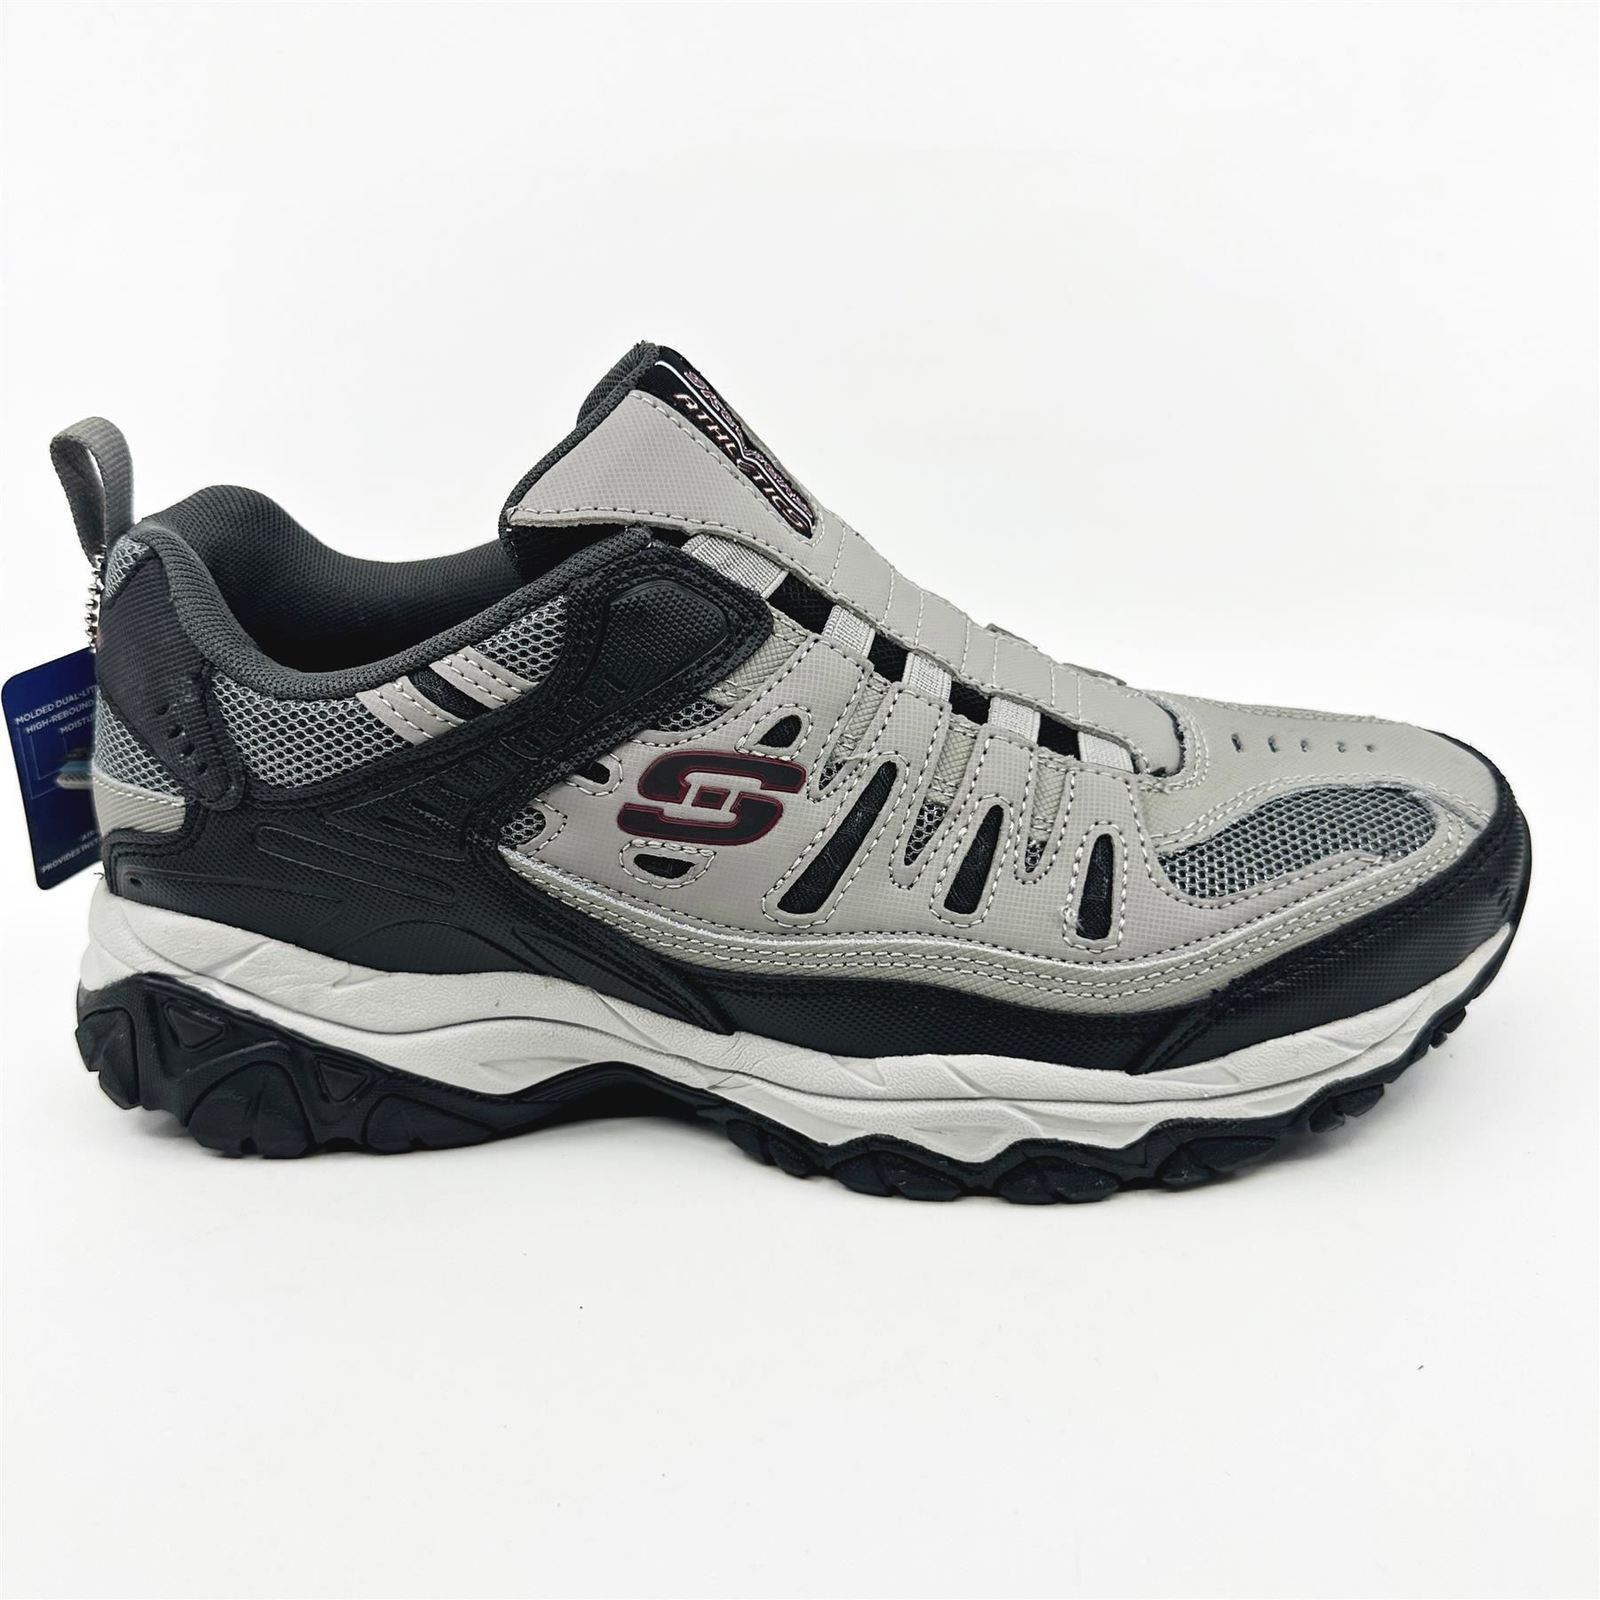 Primary image for Skechers After Burn M Fit Wonted Gray Black Mens Slip On Sneakers